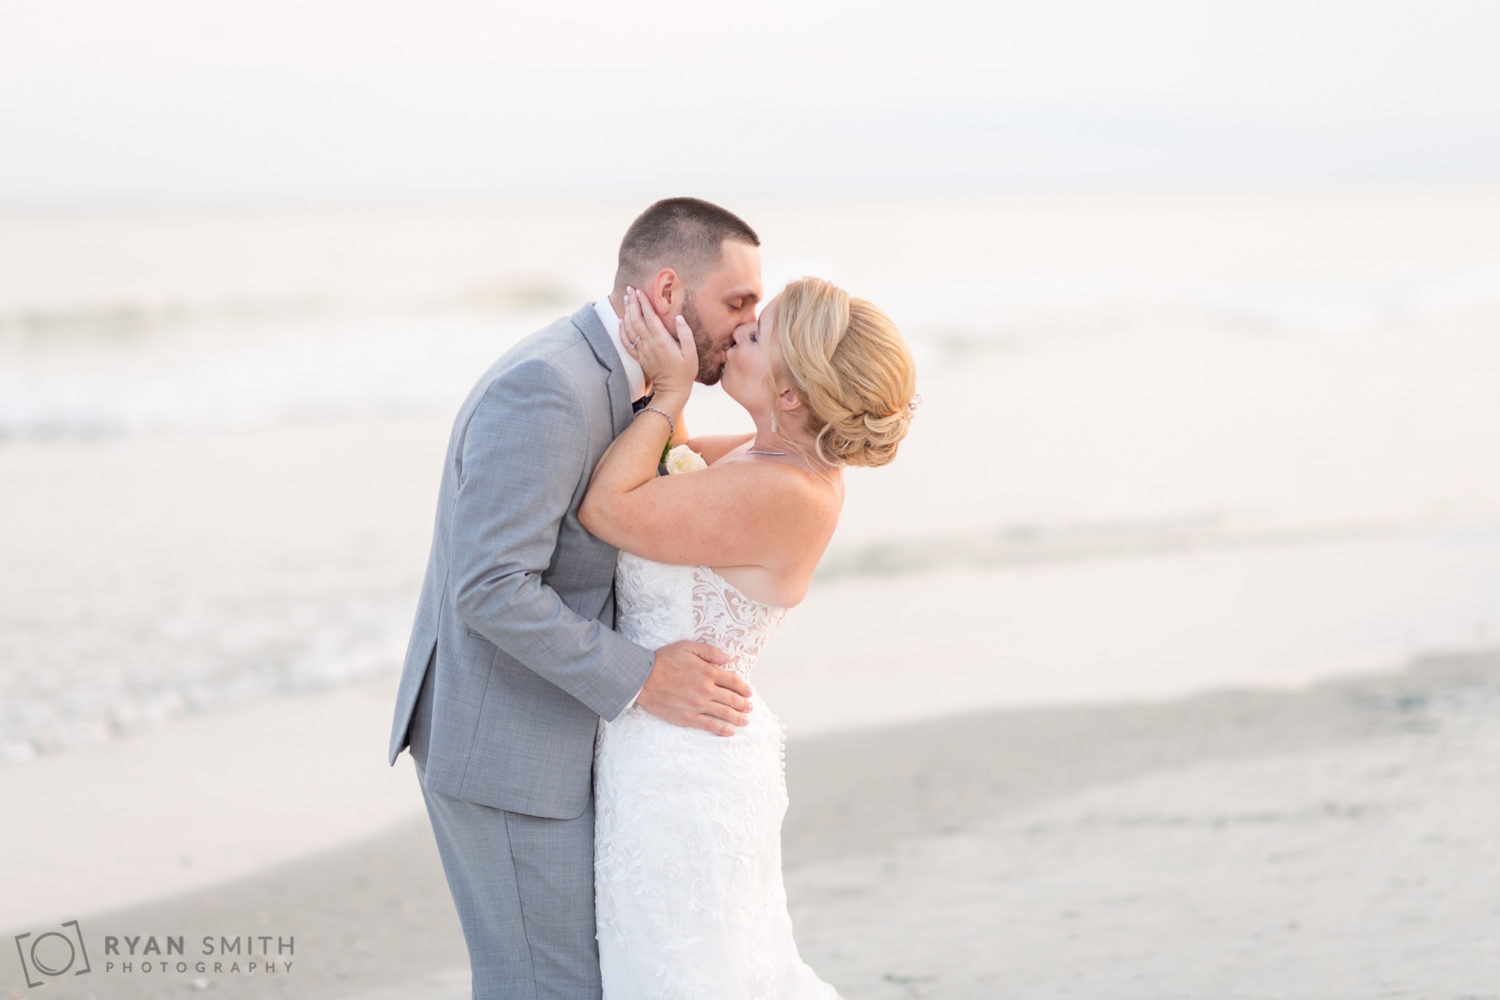 Bride pulling groom in for a kiss in front of the ocean - 21 Main Events - North Myrtle Beach